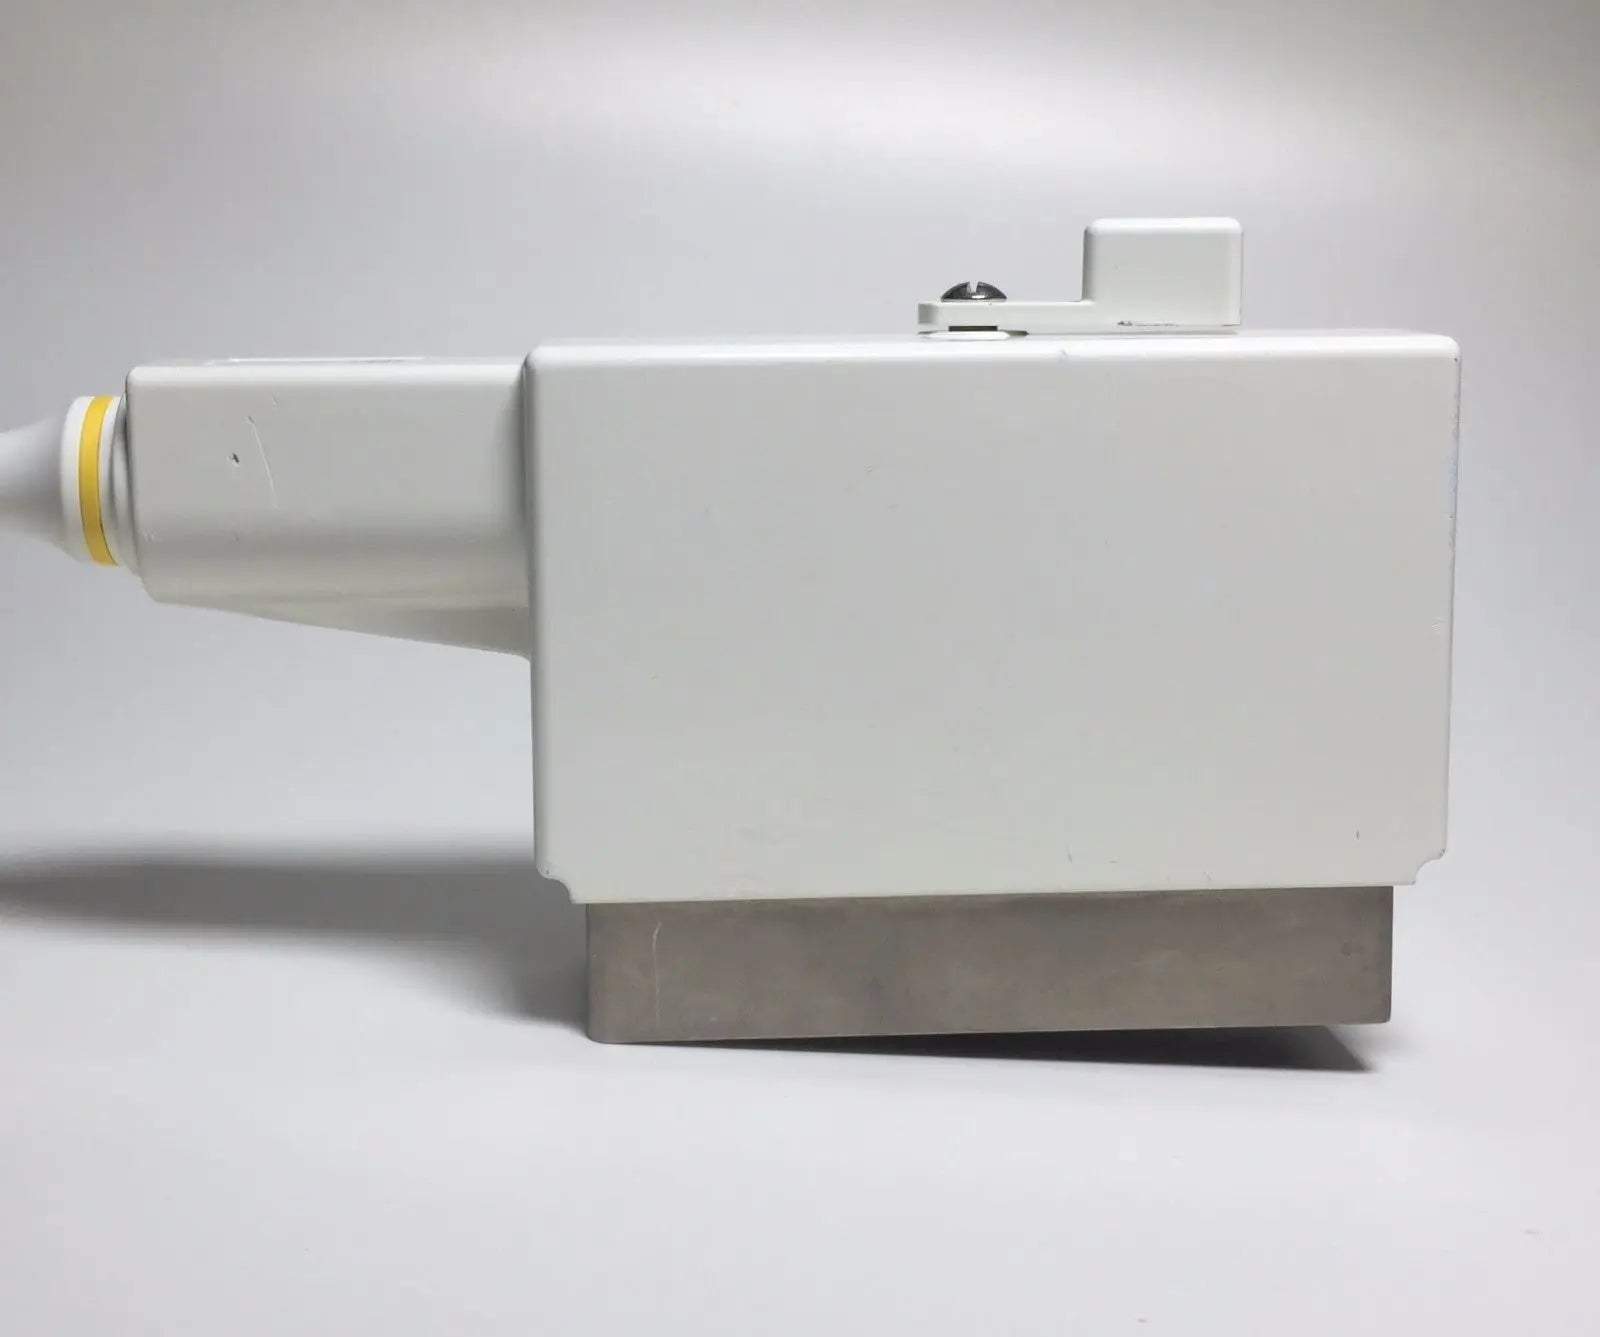 GE 546L Linear Array Ultrasound Transducer Probe Part Number: 2144202 (Untested) DIAGNOSTIC ULTRASOUND MACHINES FOR SALE